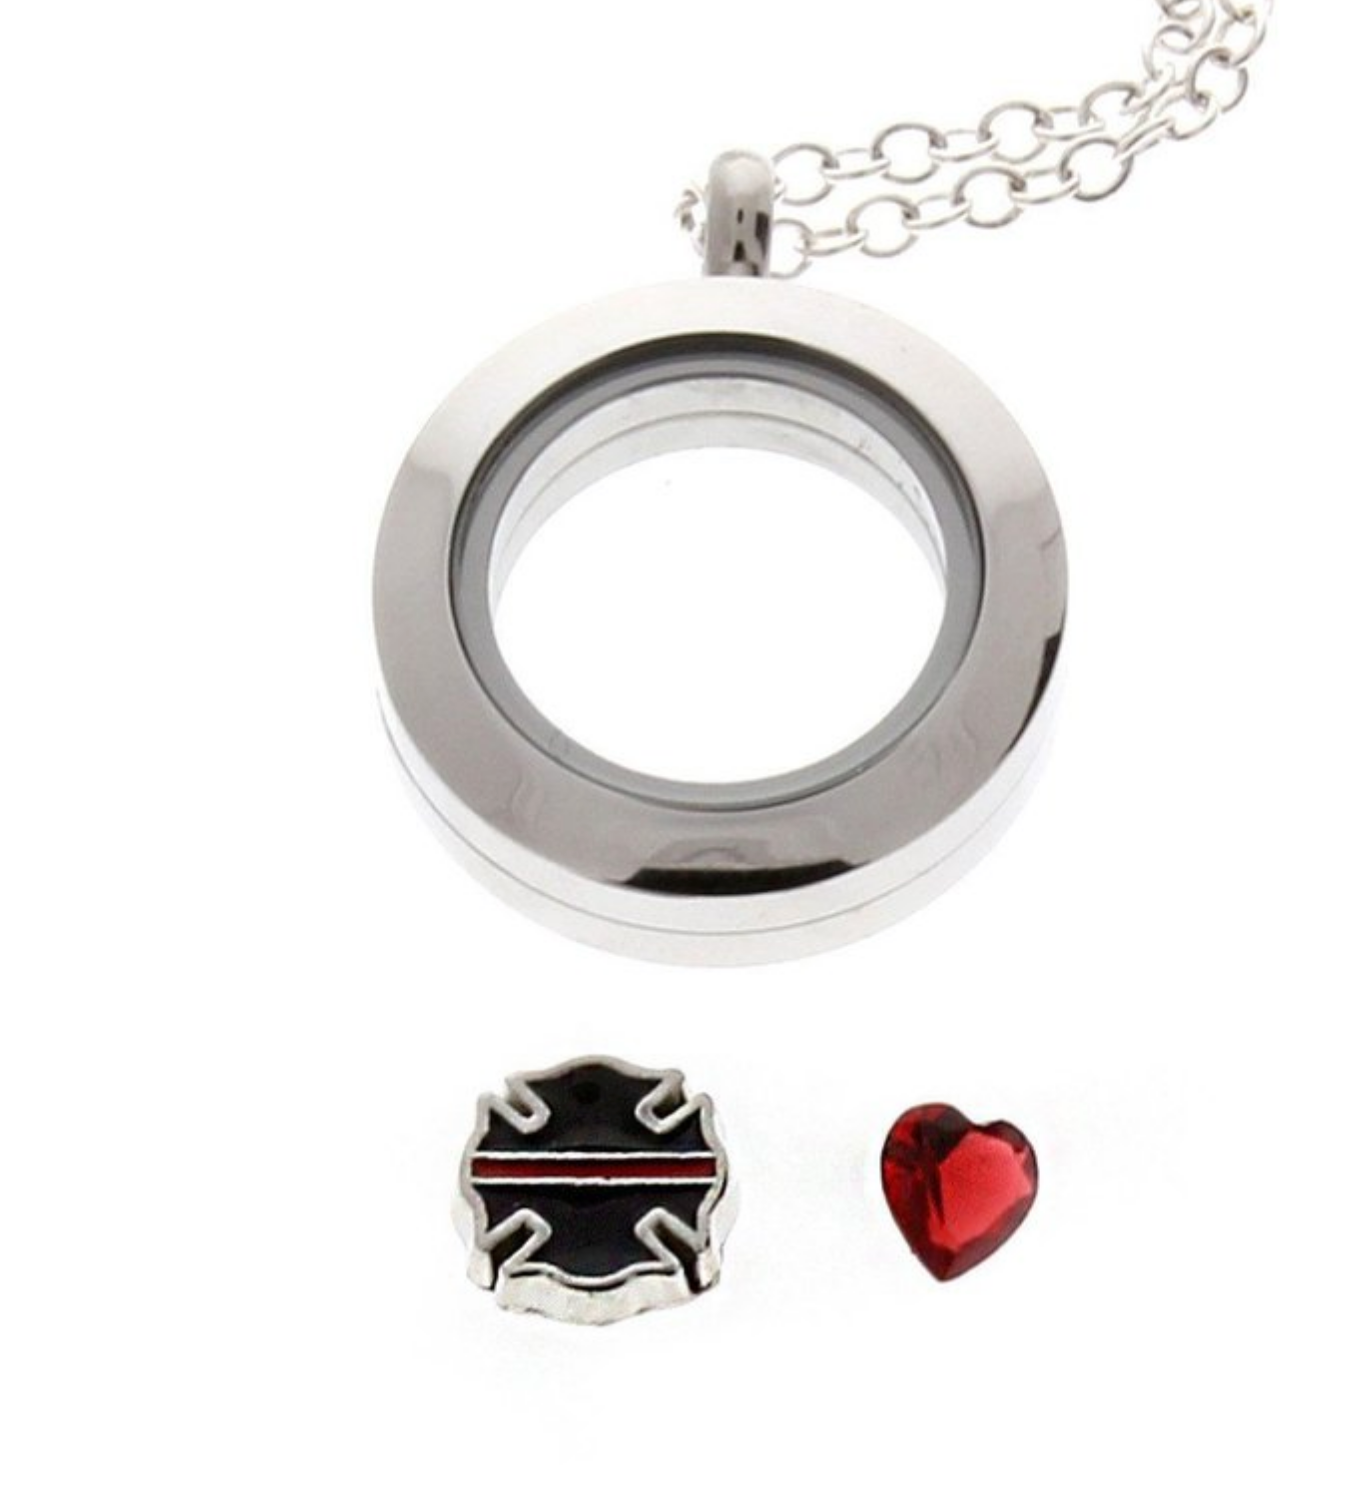 Firefighter "Thin Red Line" Floating Locket